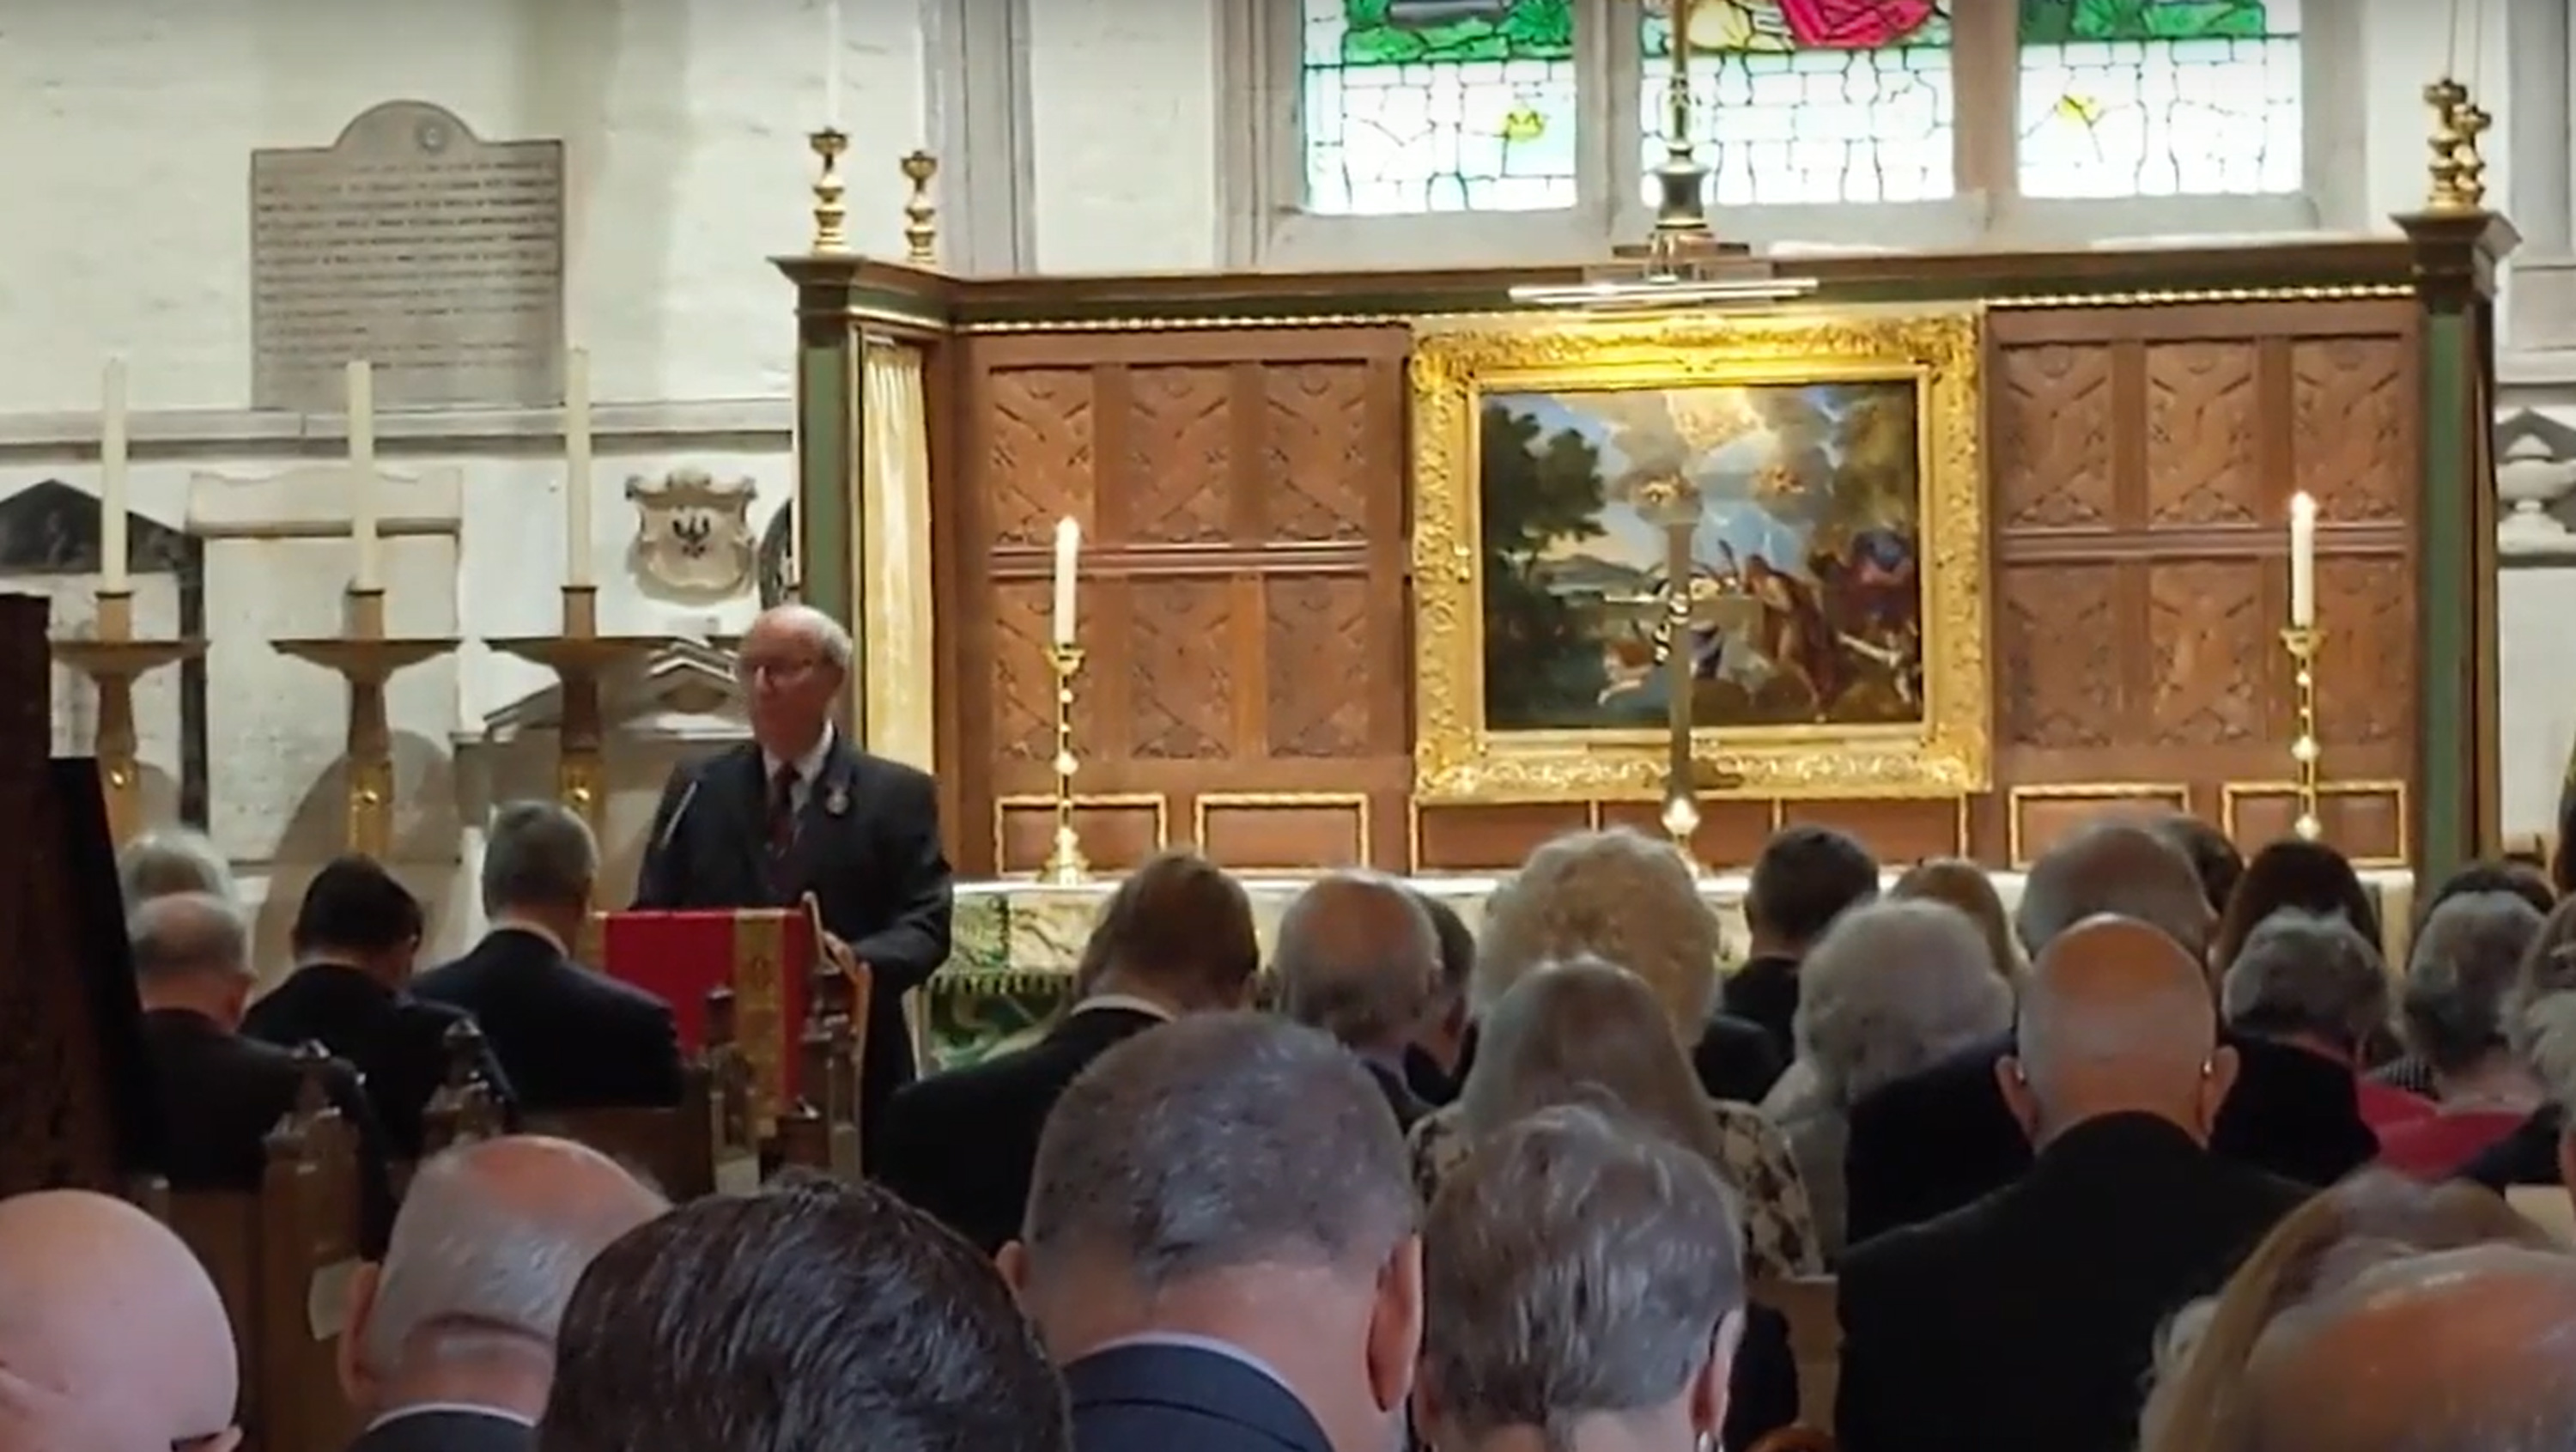 centenary service for the Havard Chapel in Brecon Catyhedral